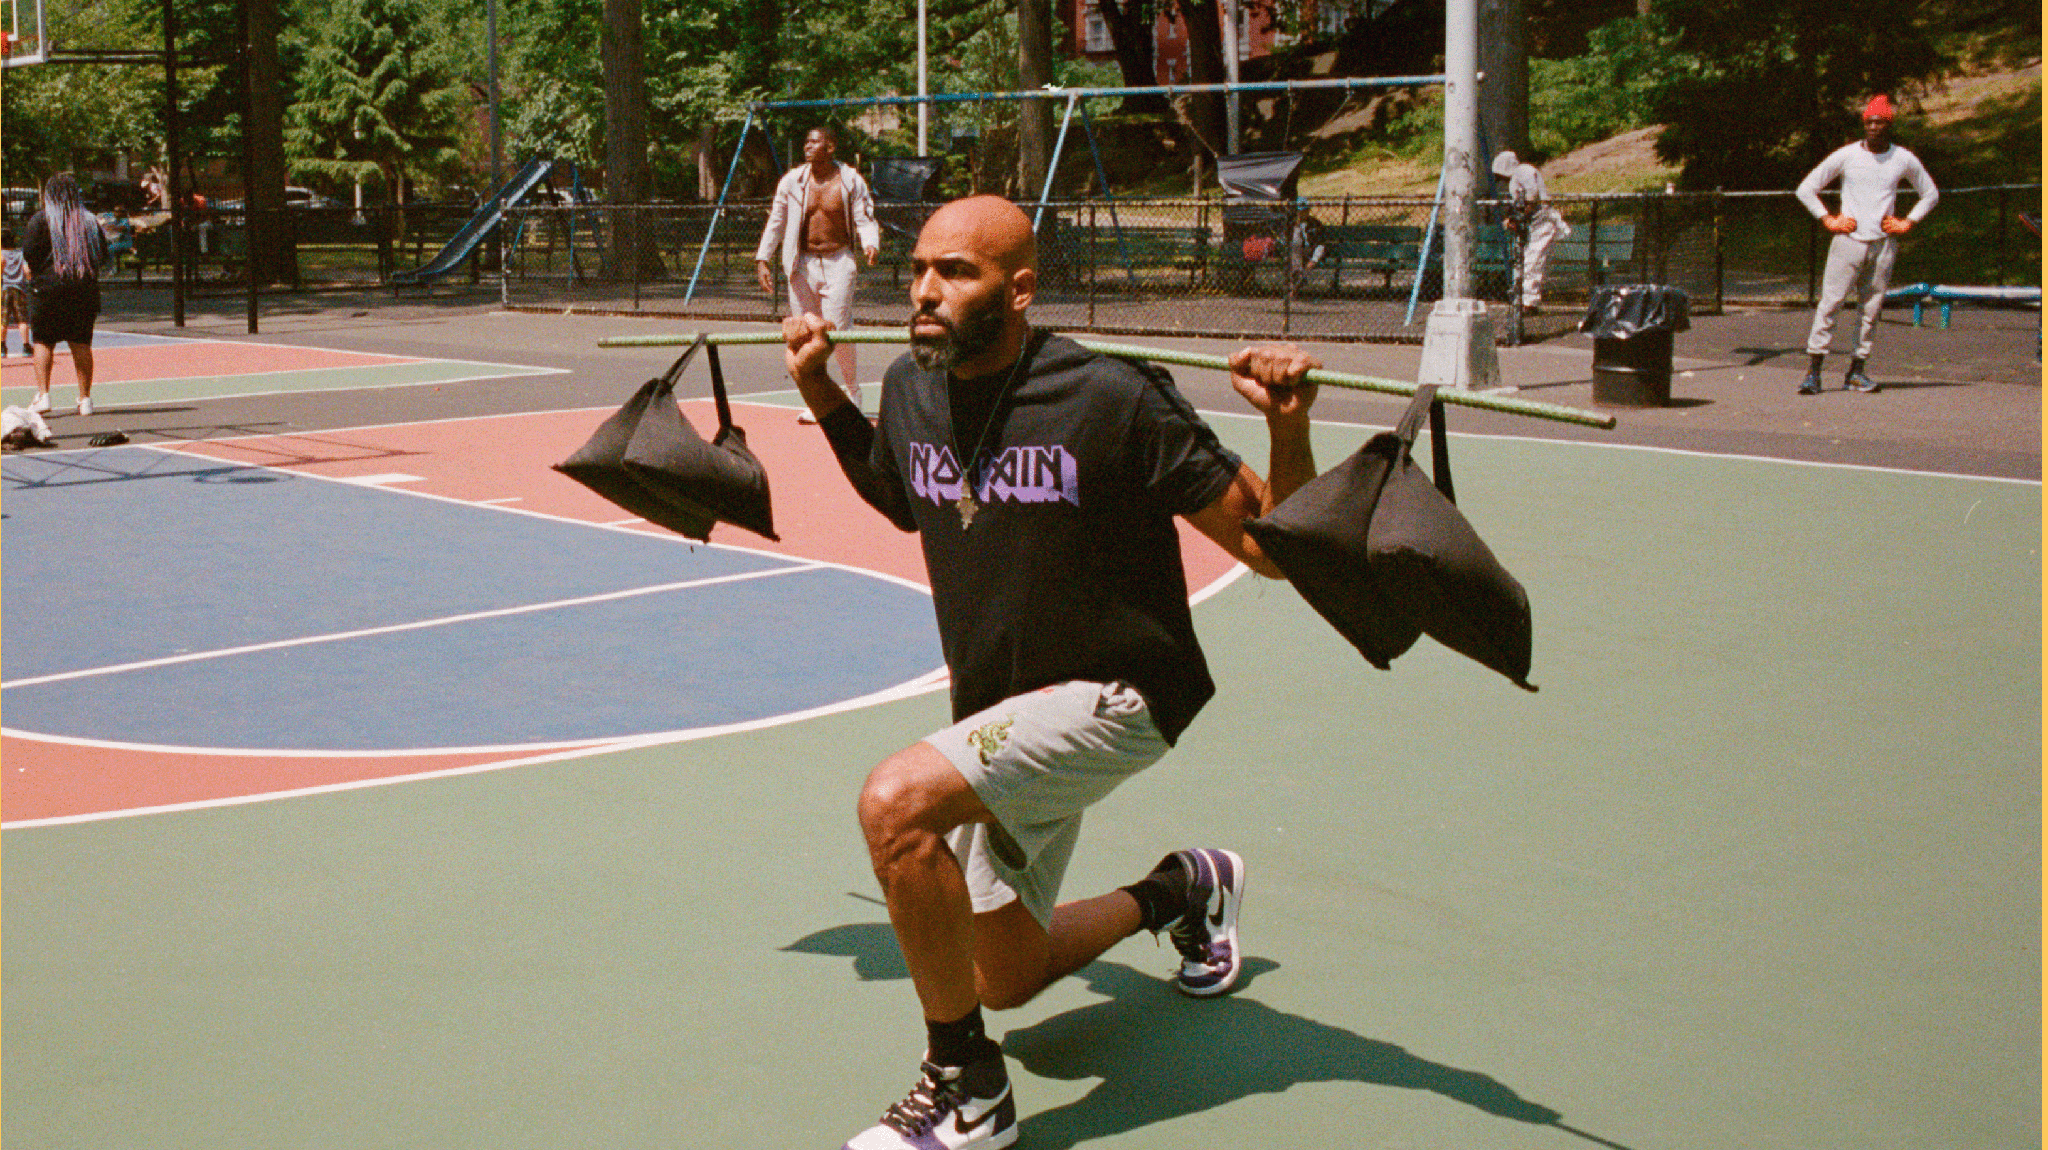 Man doing lunges in a basketball court while carrying a bar with weights on shoulders.